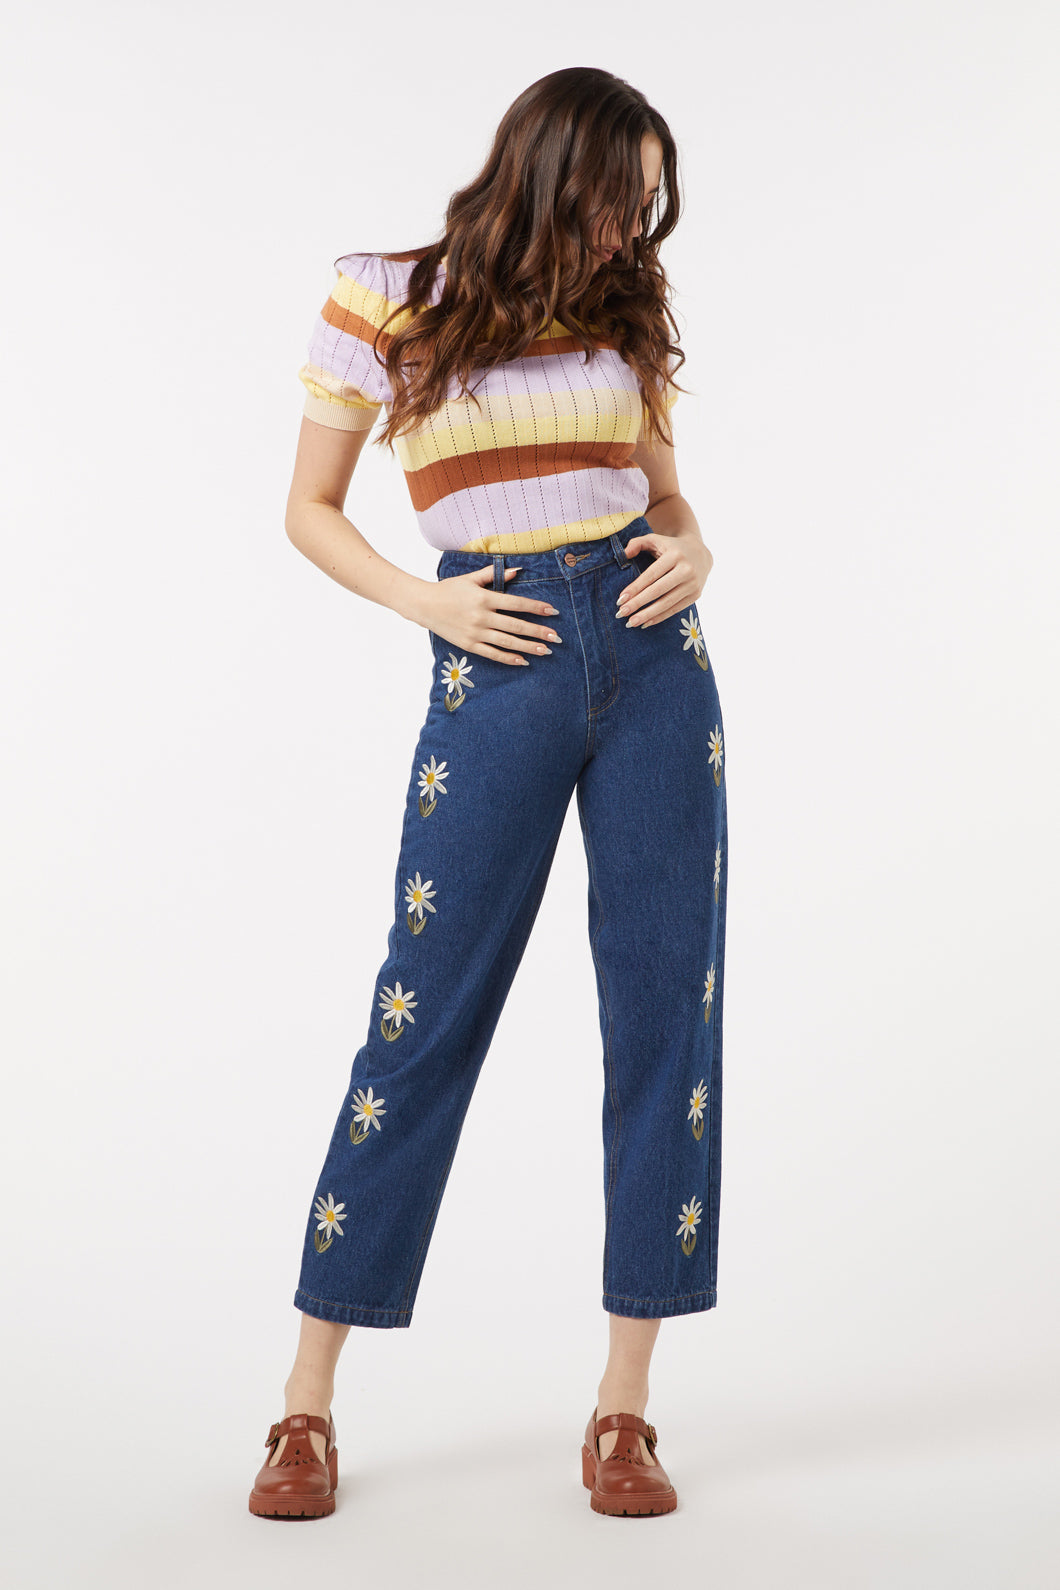 Daisy Embroidered Jean